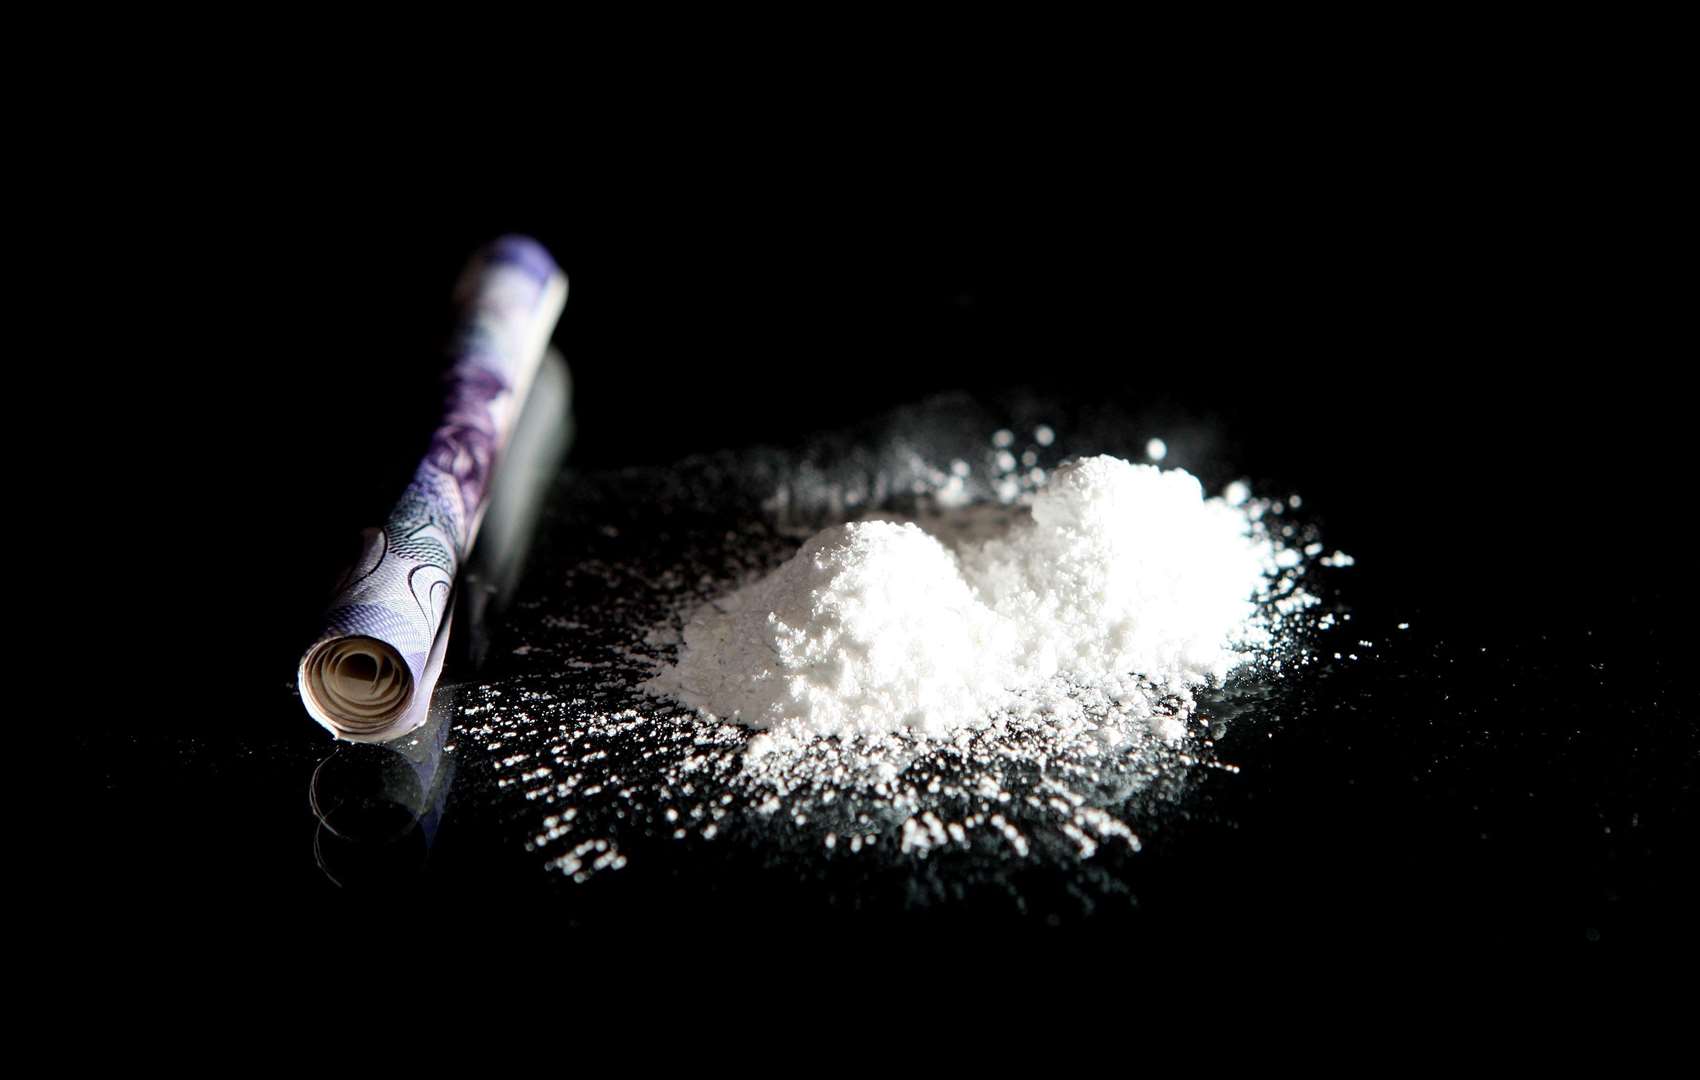 £1.4 million of cocaine was found under the bed. Stock image